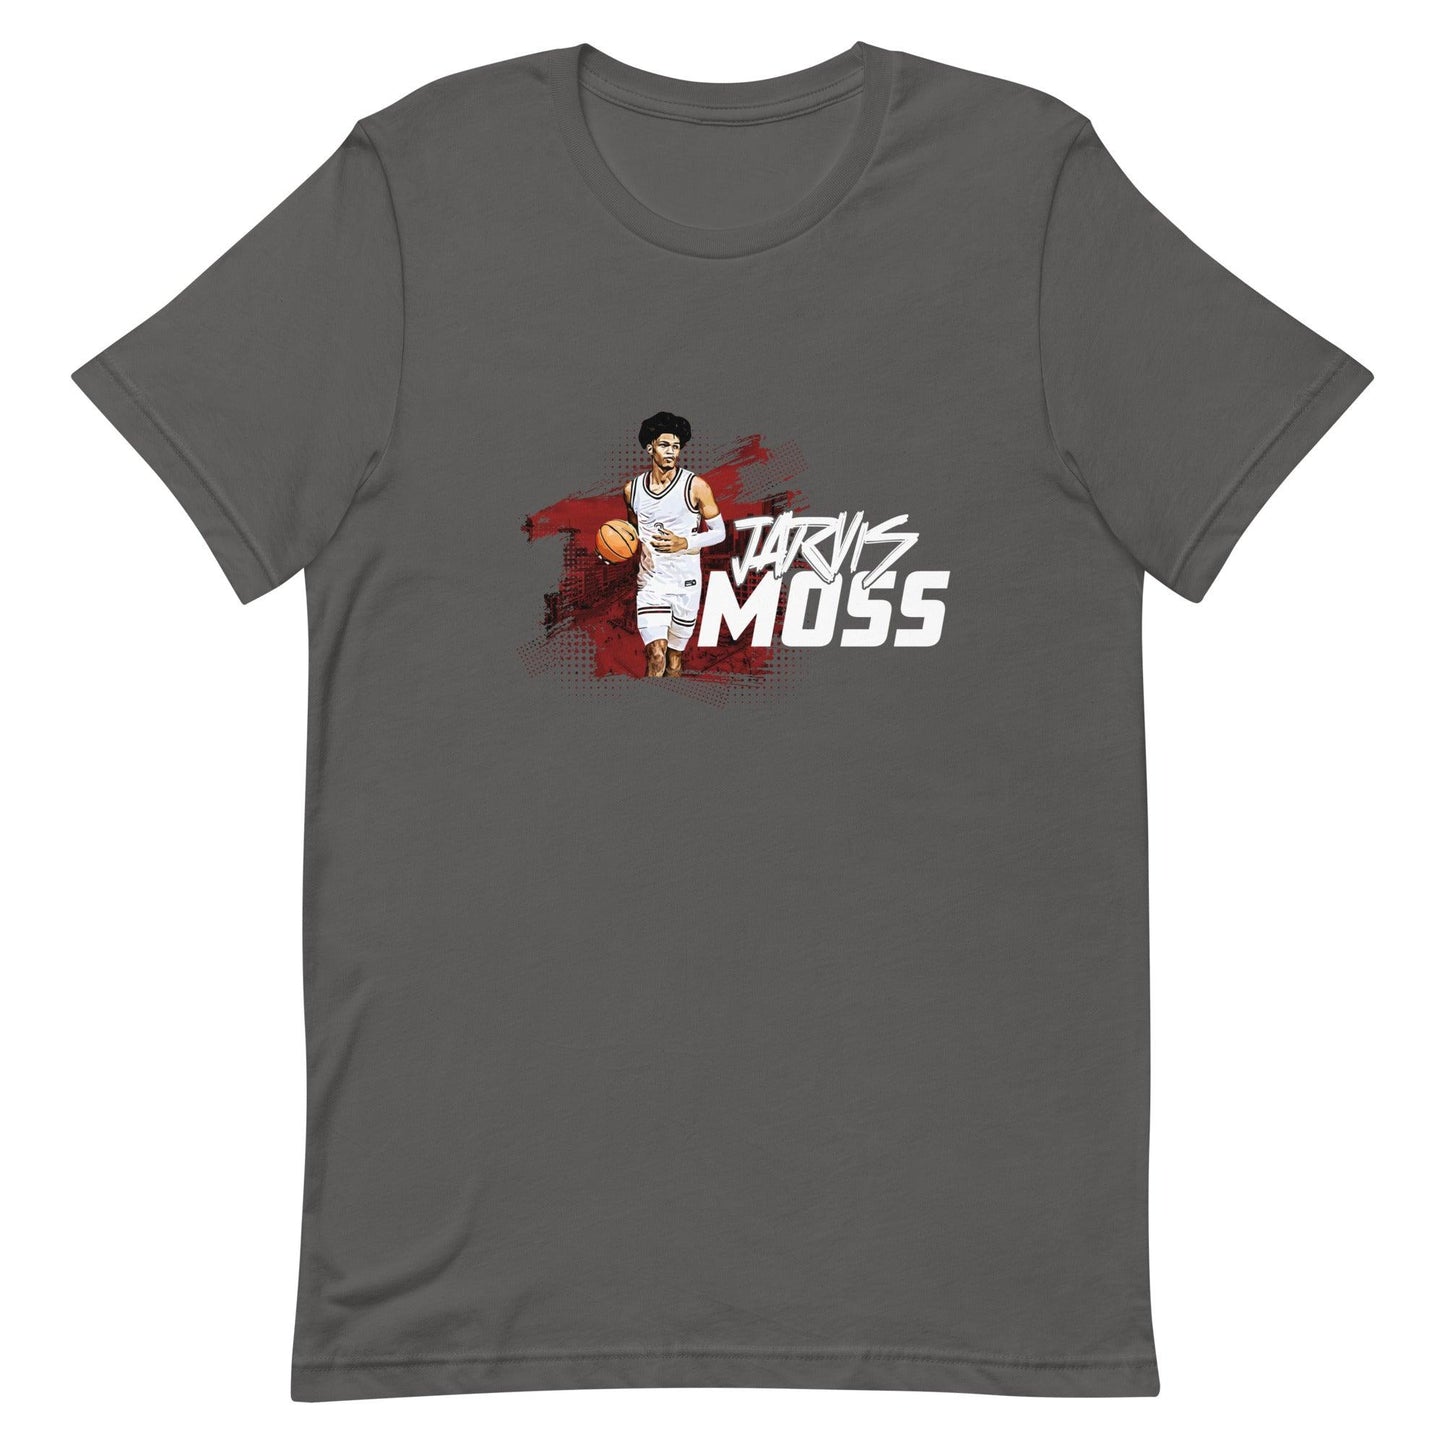 Jarvis Moss "Gameday" t-shirt - Fan Arch